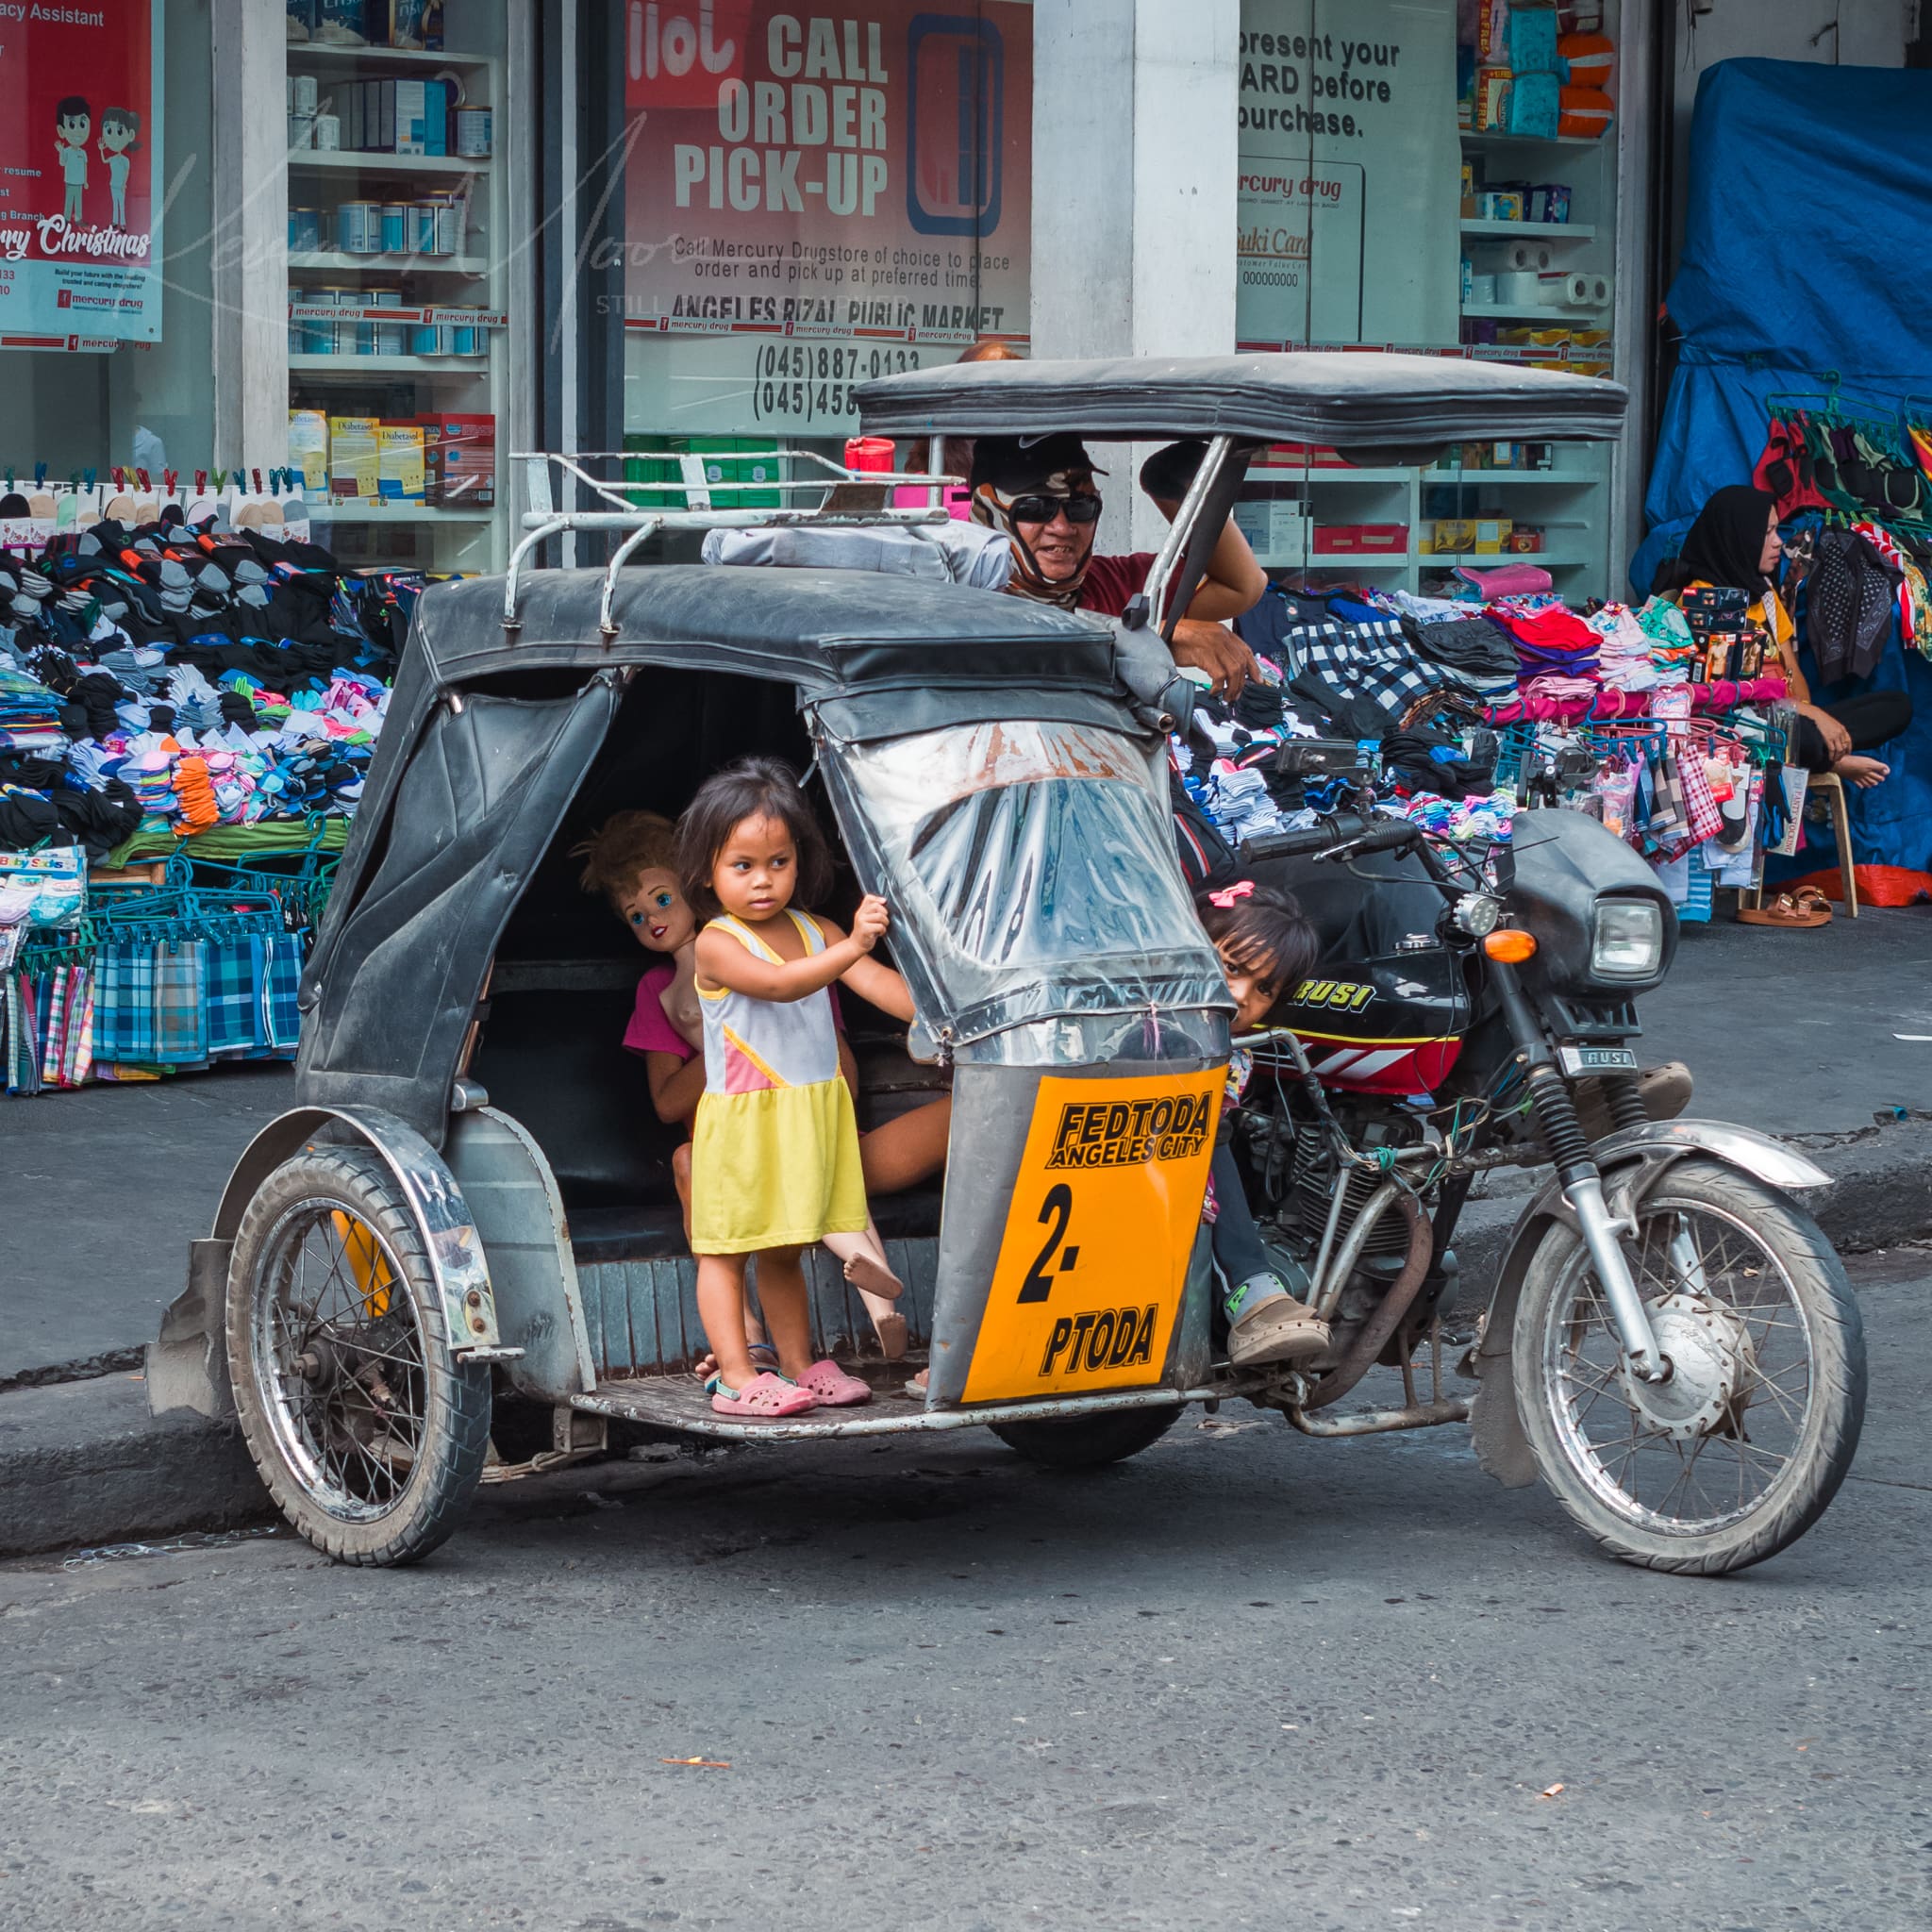 Motorized tricycle with children and driver in urban Philippines marketplace.